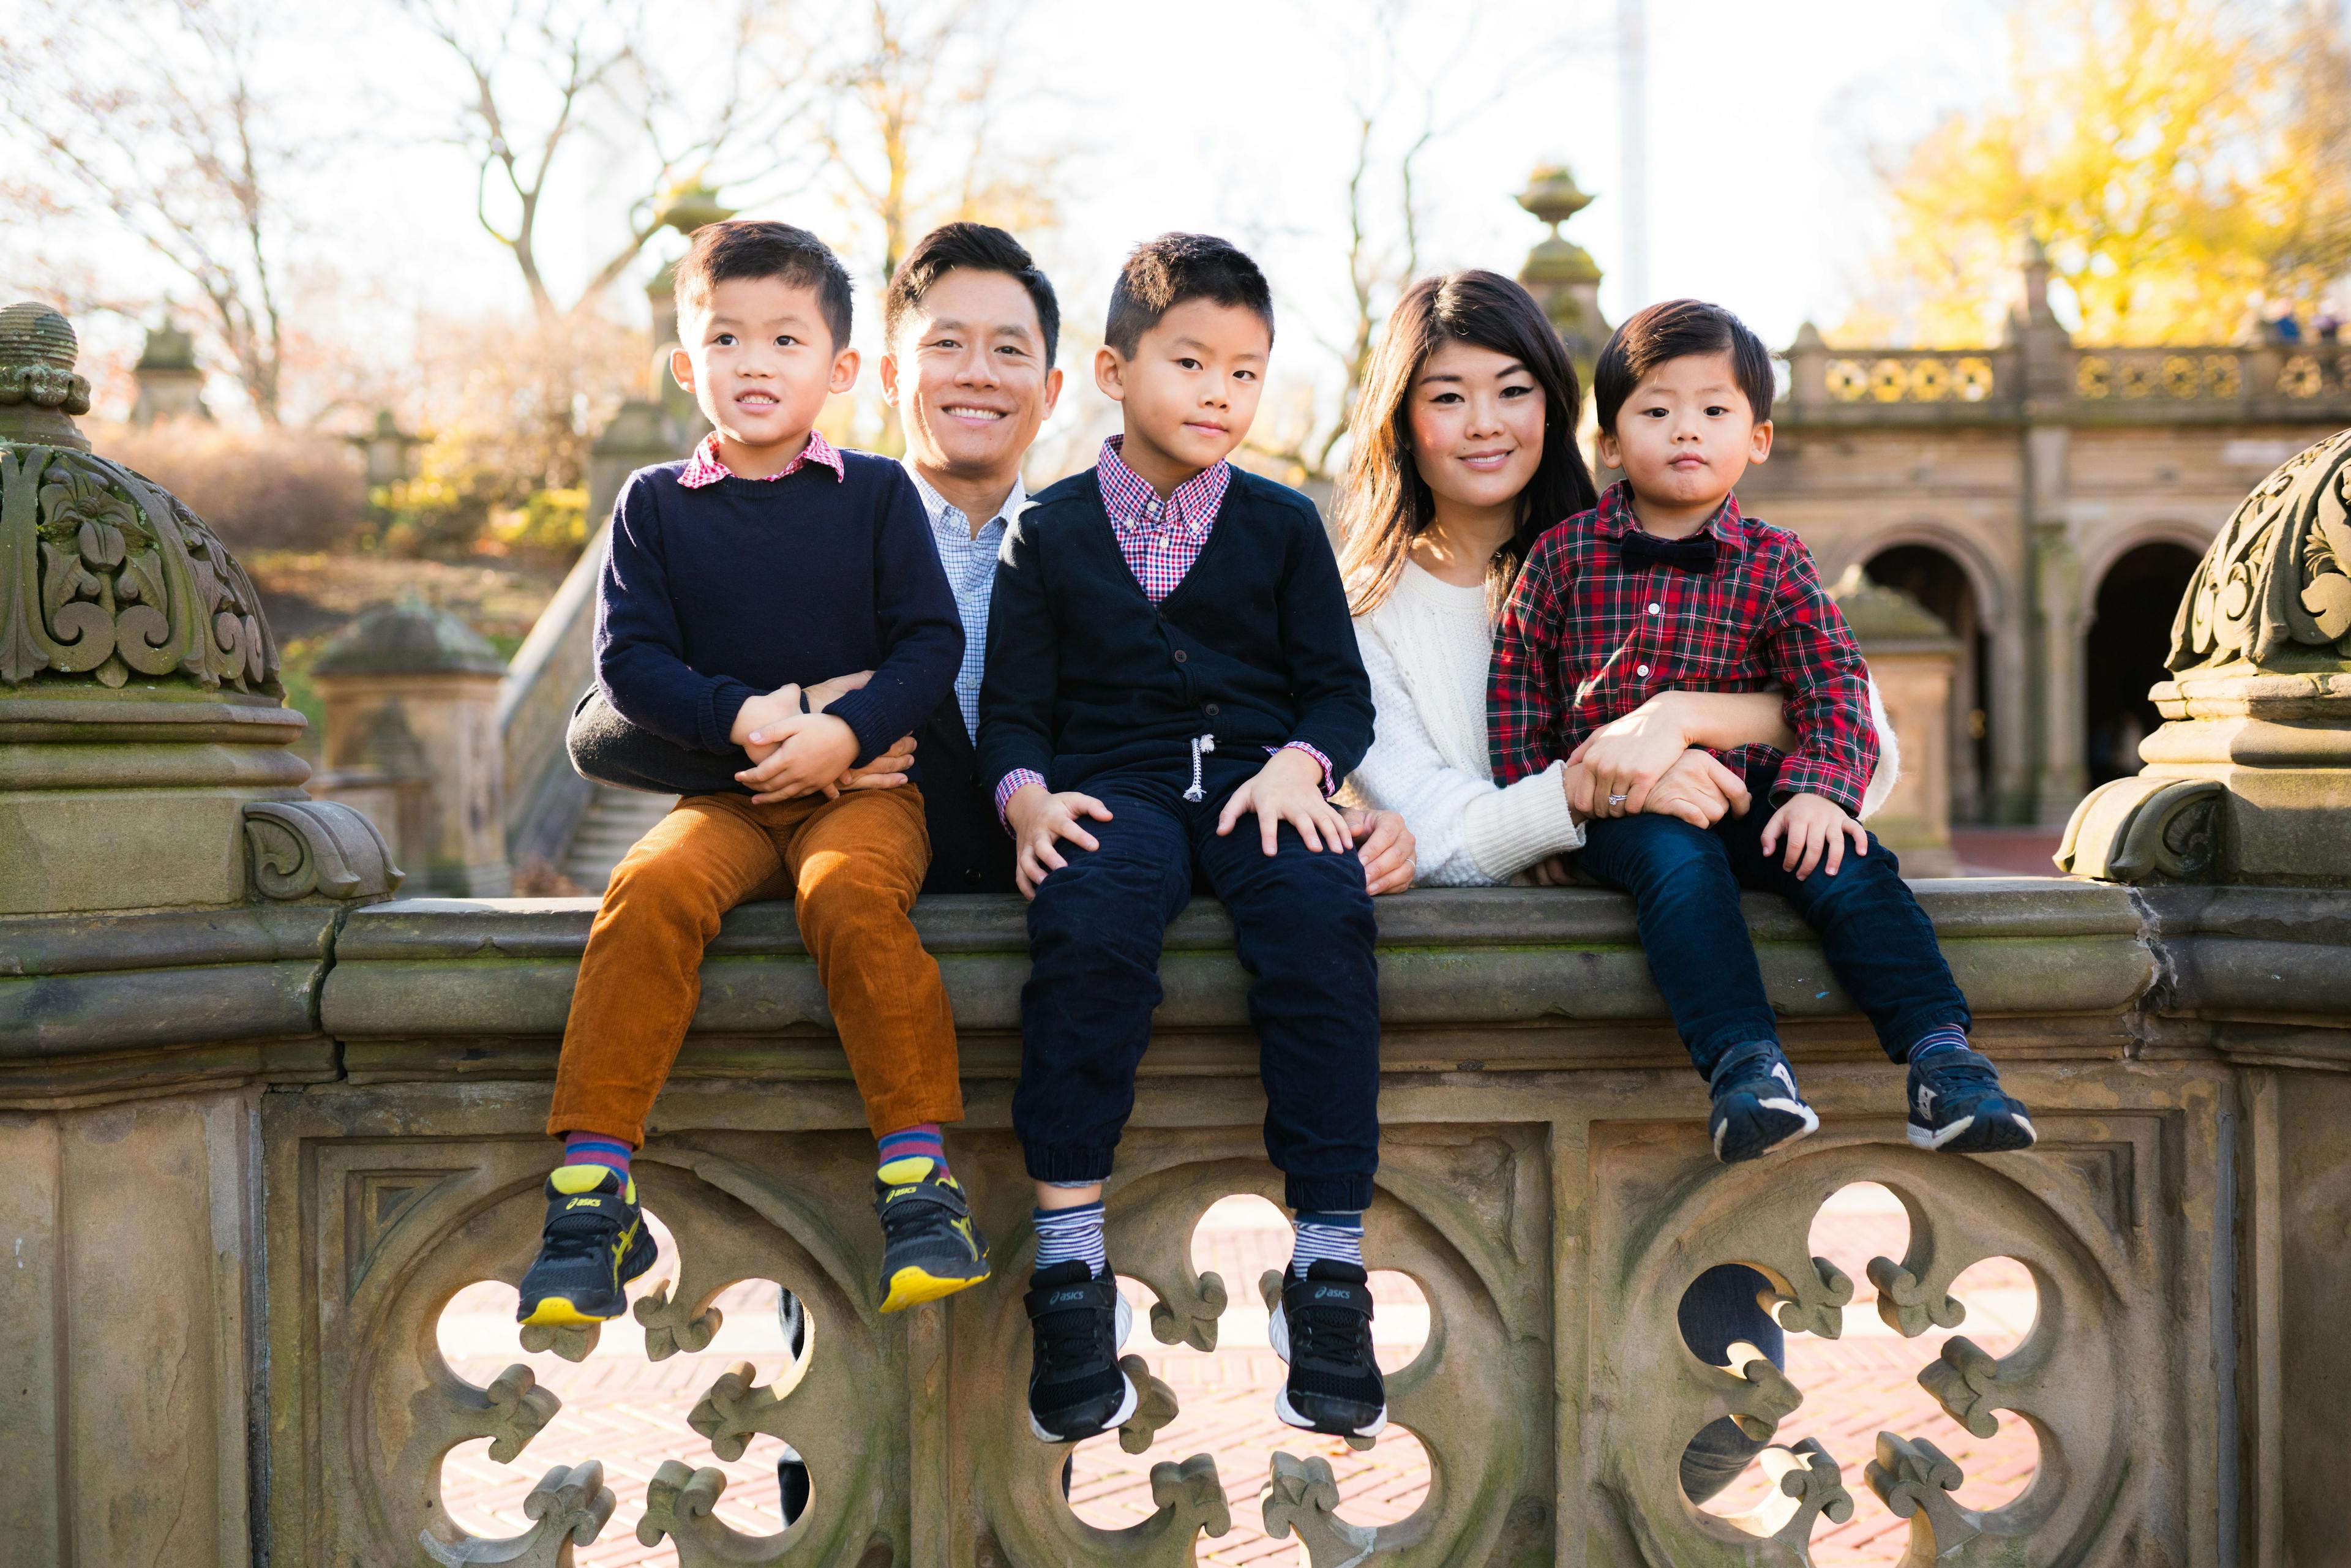 A family of five poses happily on an ornate bridge.